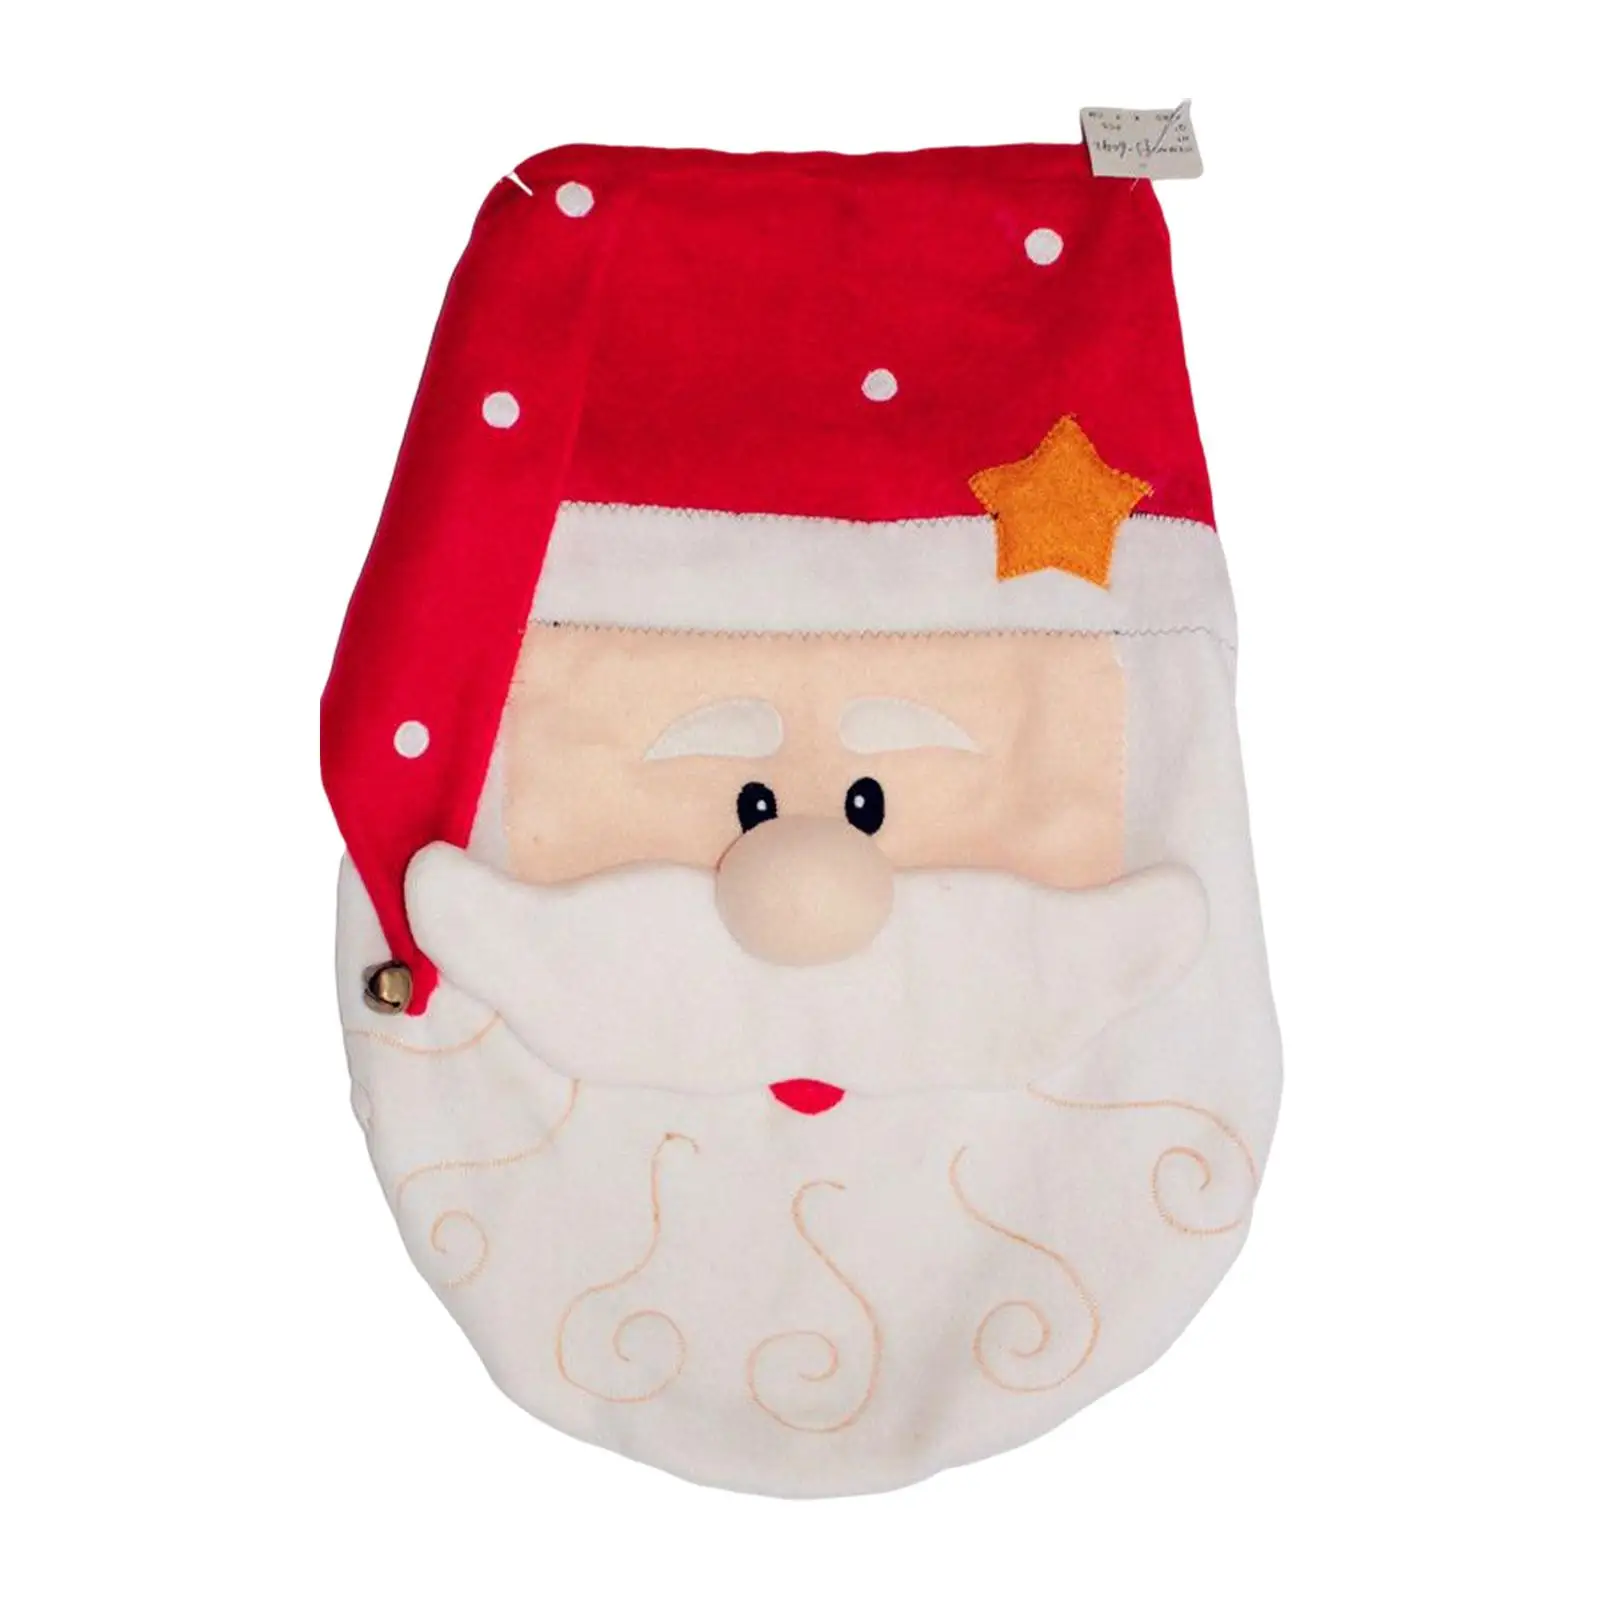 Fancy Toilet Seat Cover, Christmas, Supplies, Lid Cover, for Xmas Bathroom Decor